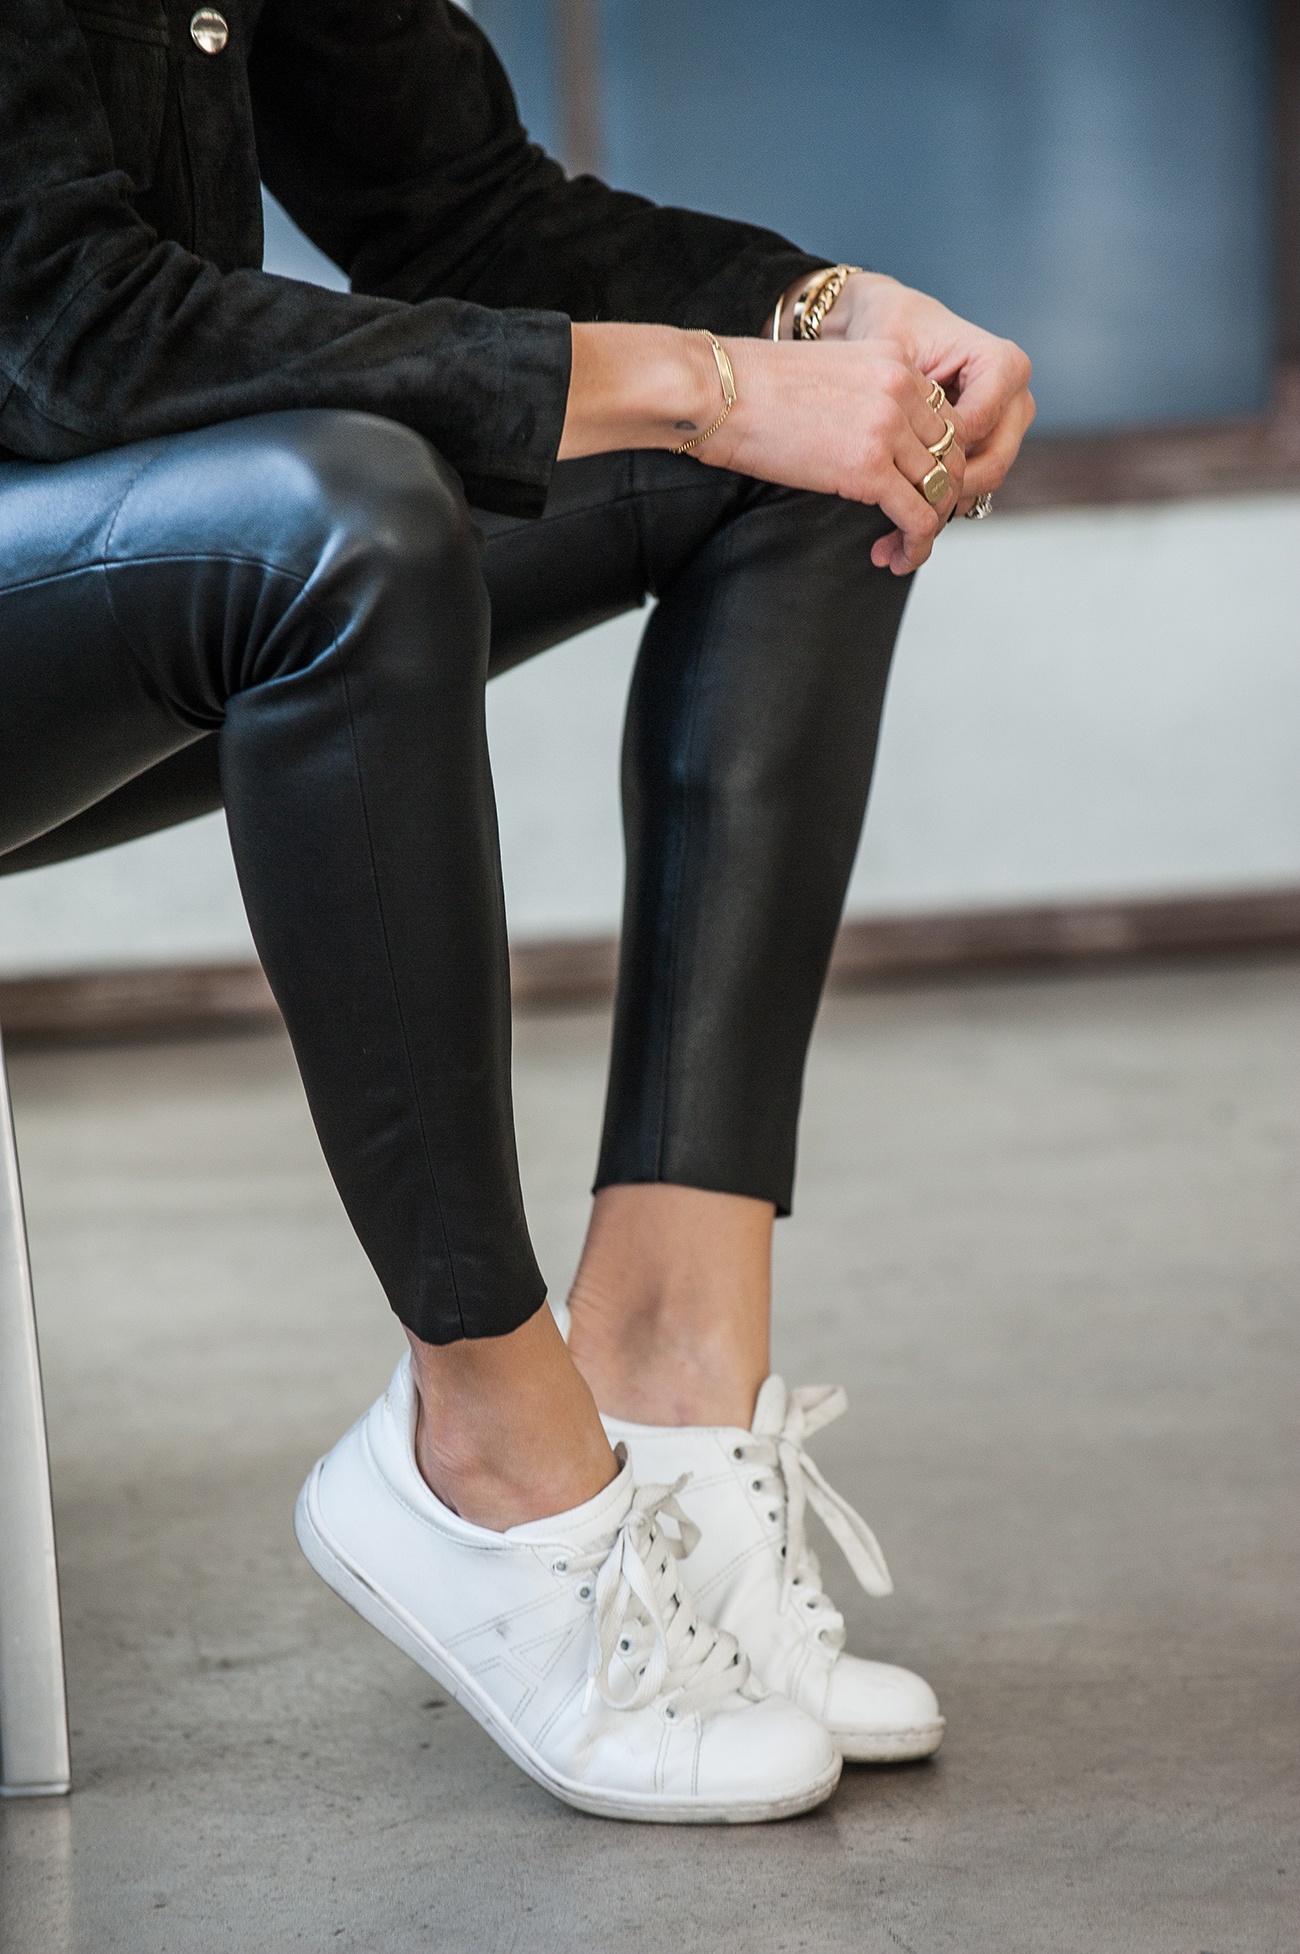 Premium Photo | Slender female legs in leggings and white stylish casual  sneakers women's comfortable summer shoes